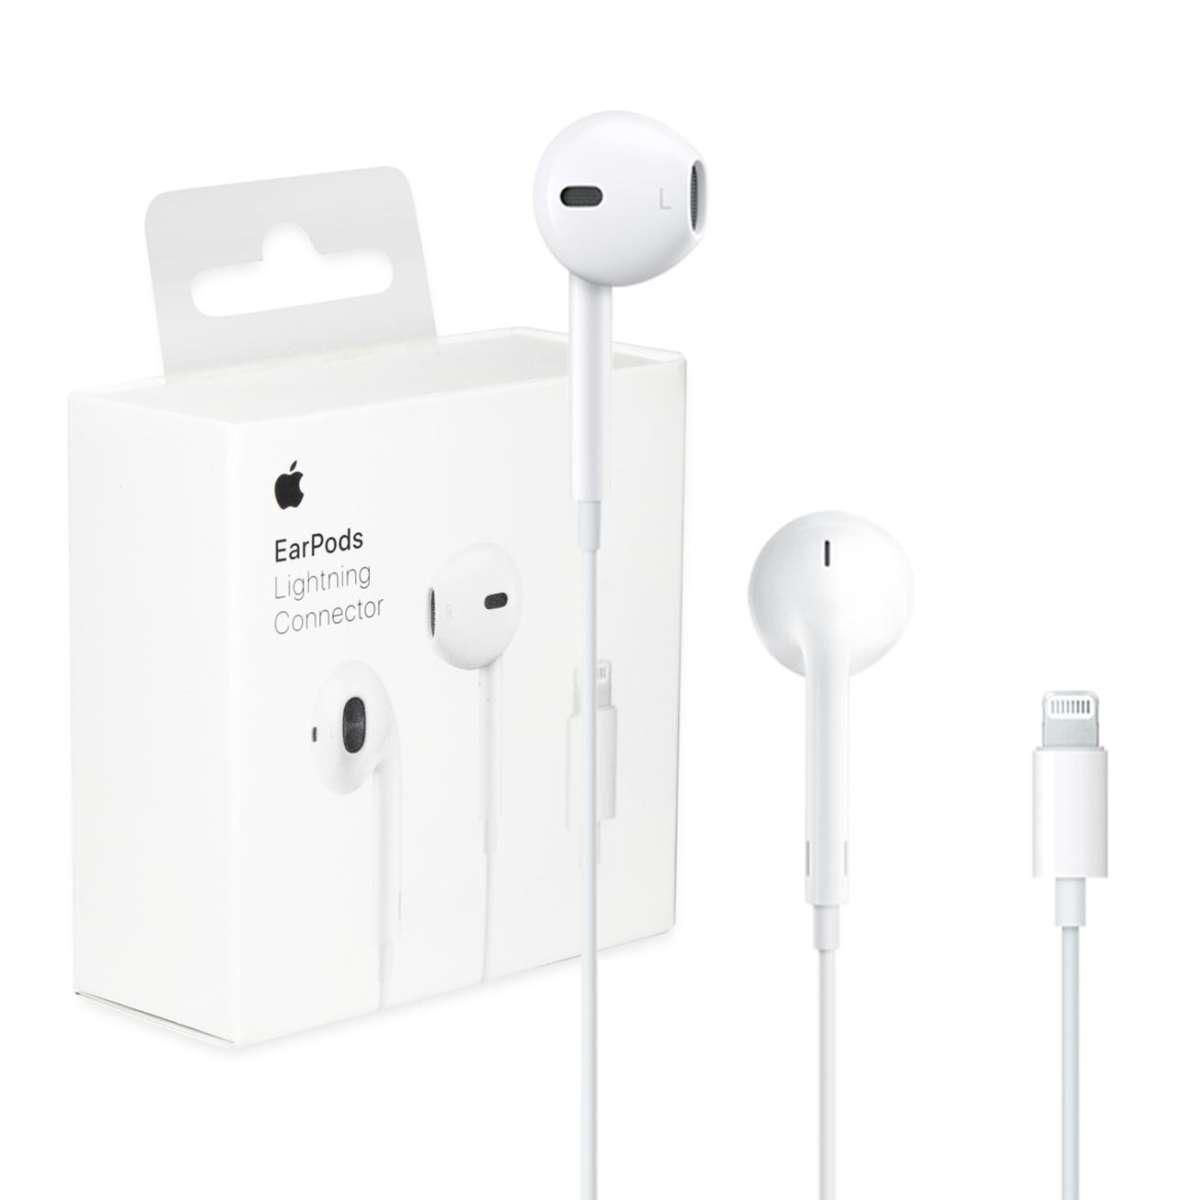 GENIUNE APPLE ORIGINAL LIGHTNING EARPODS APPLE IN EAR EARPHONES AND HEADPHONE WITH MICROPHONE FOR IPHONE 7 TO THE IPHONE 12PRO M